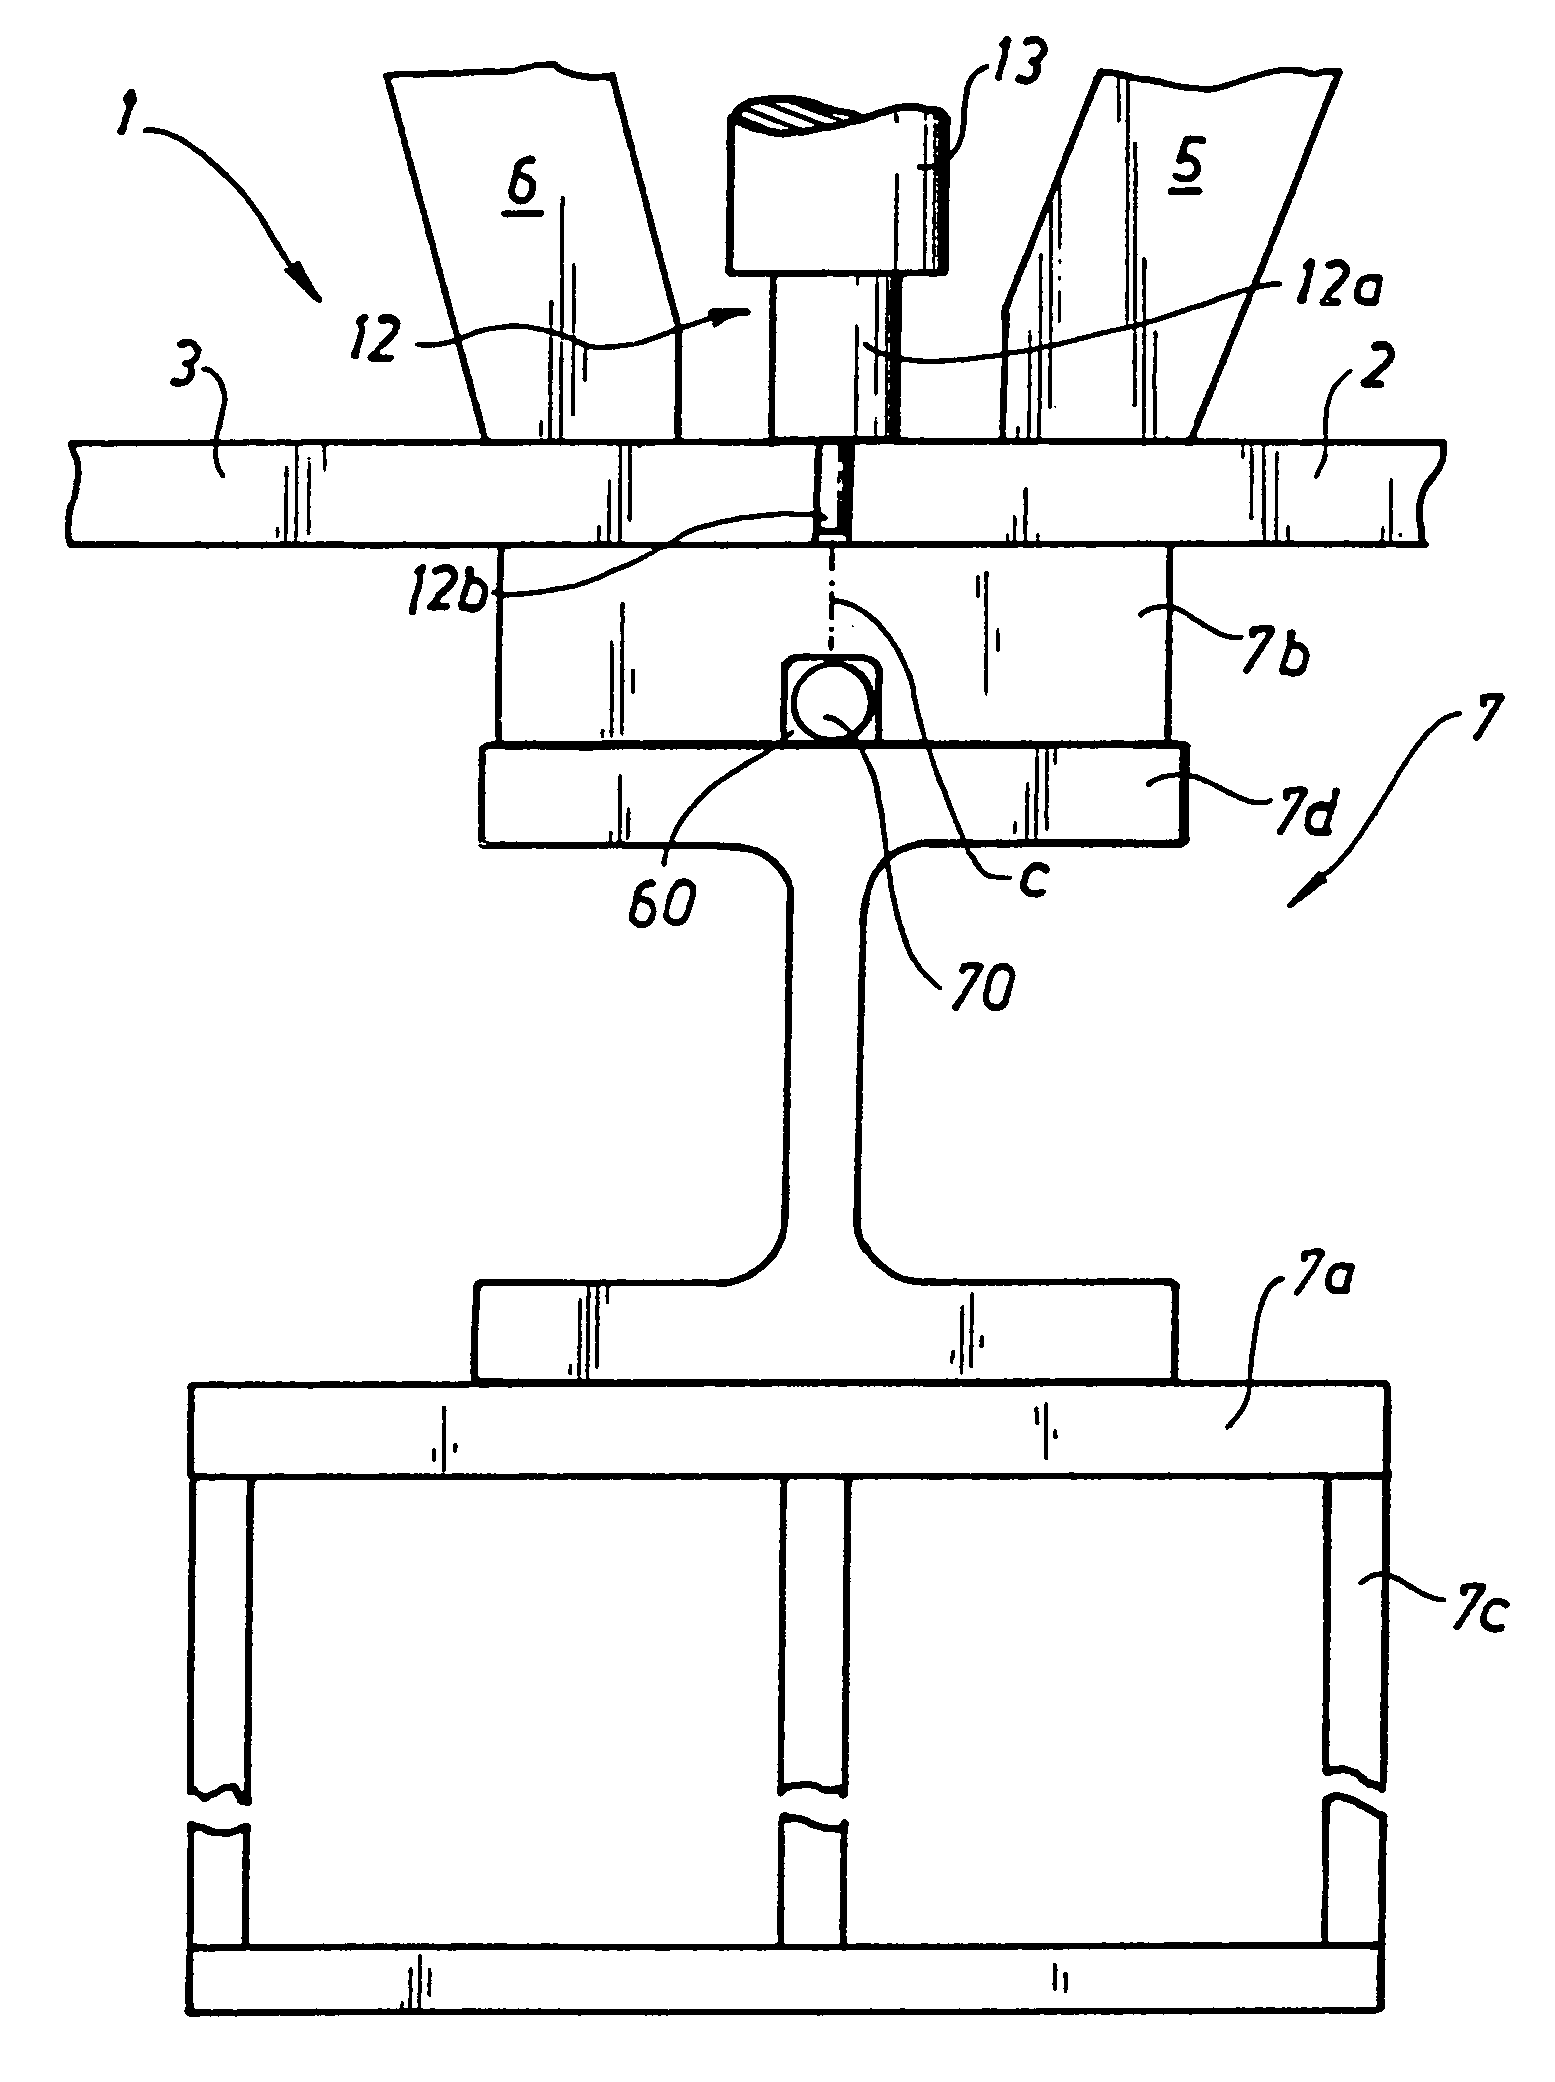 Method and apparatus for friction stir welding